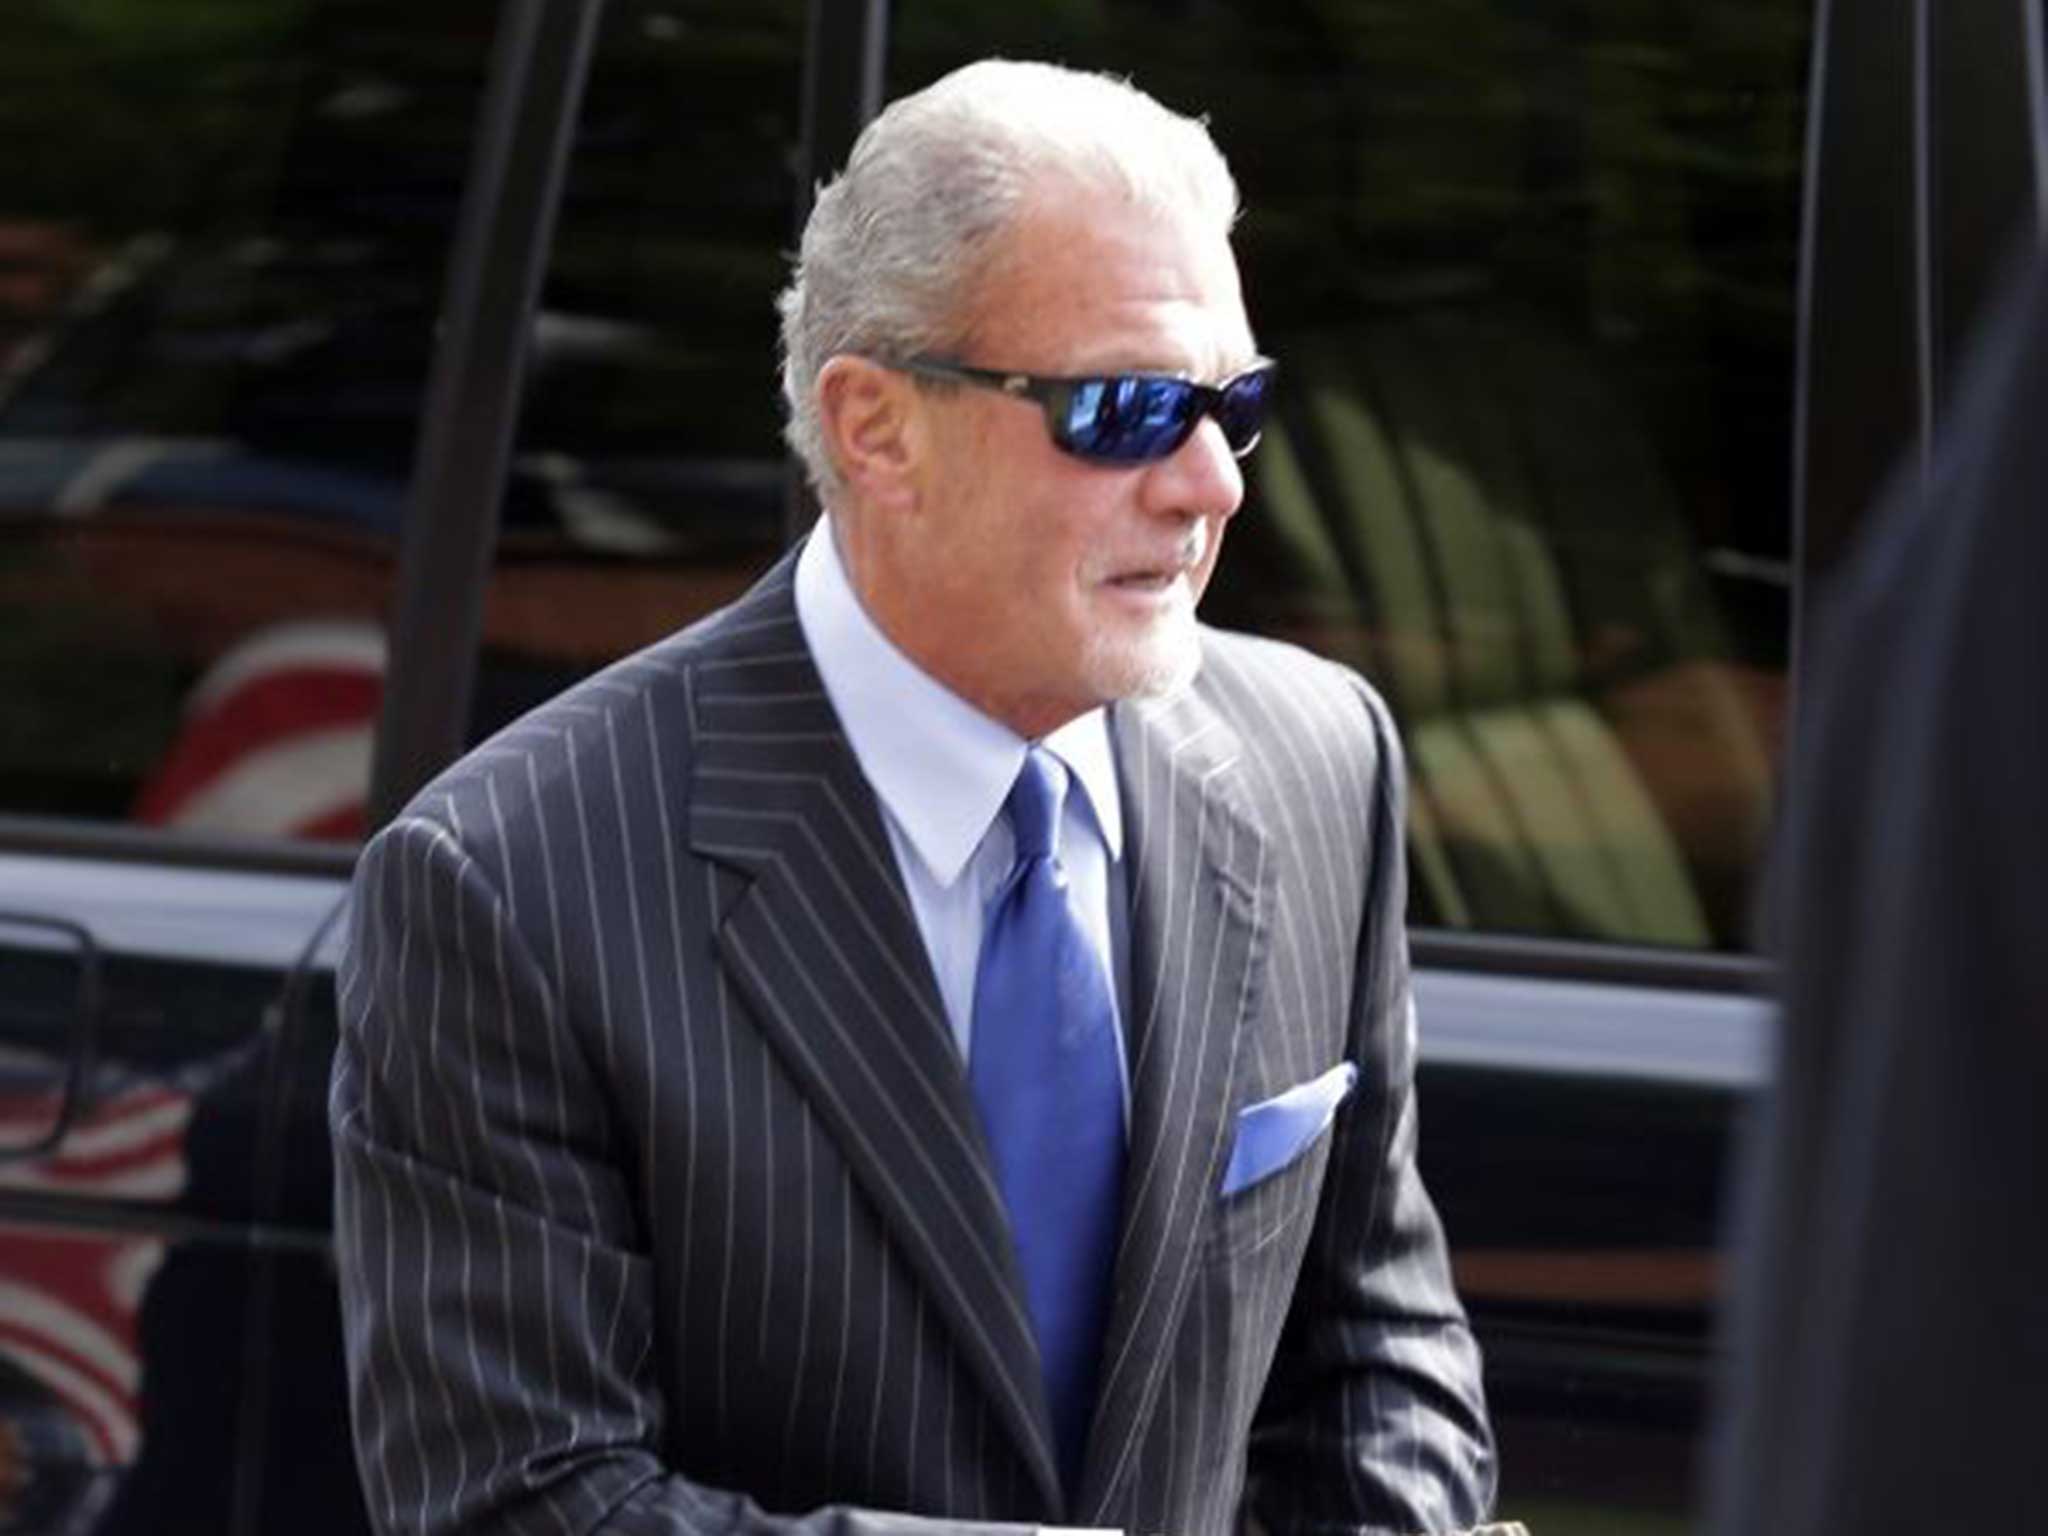 Irsay has been banned from all football activities